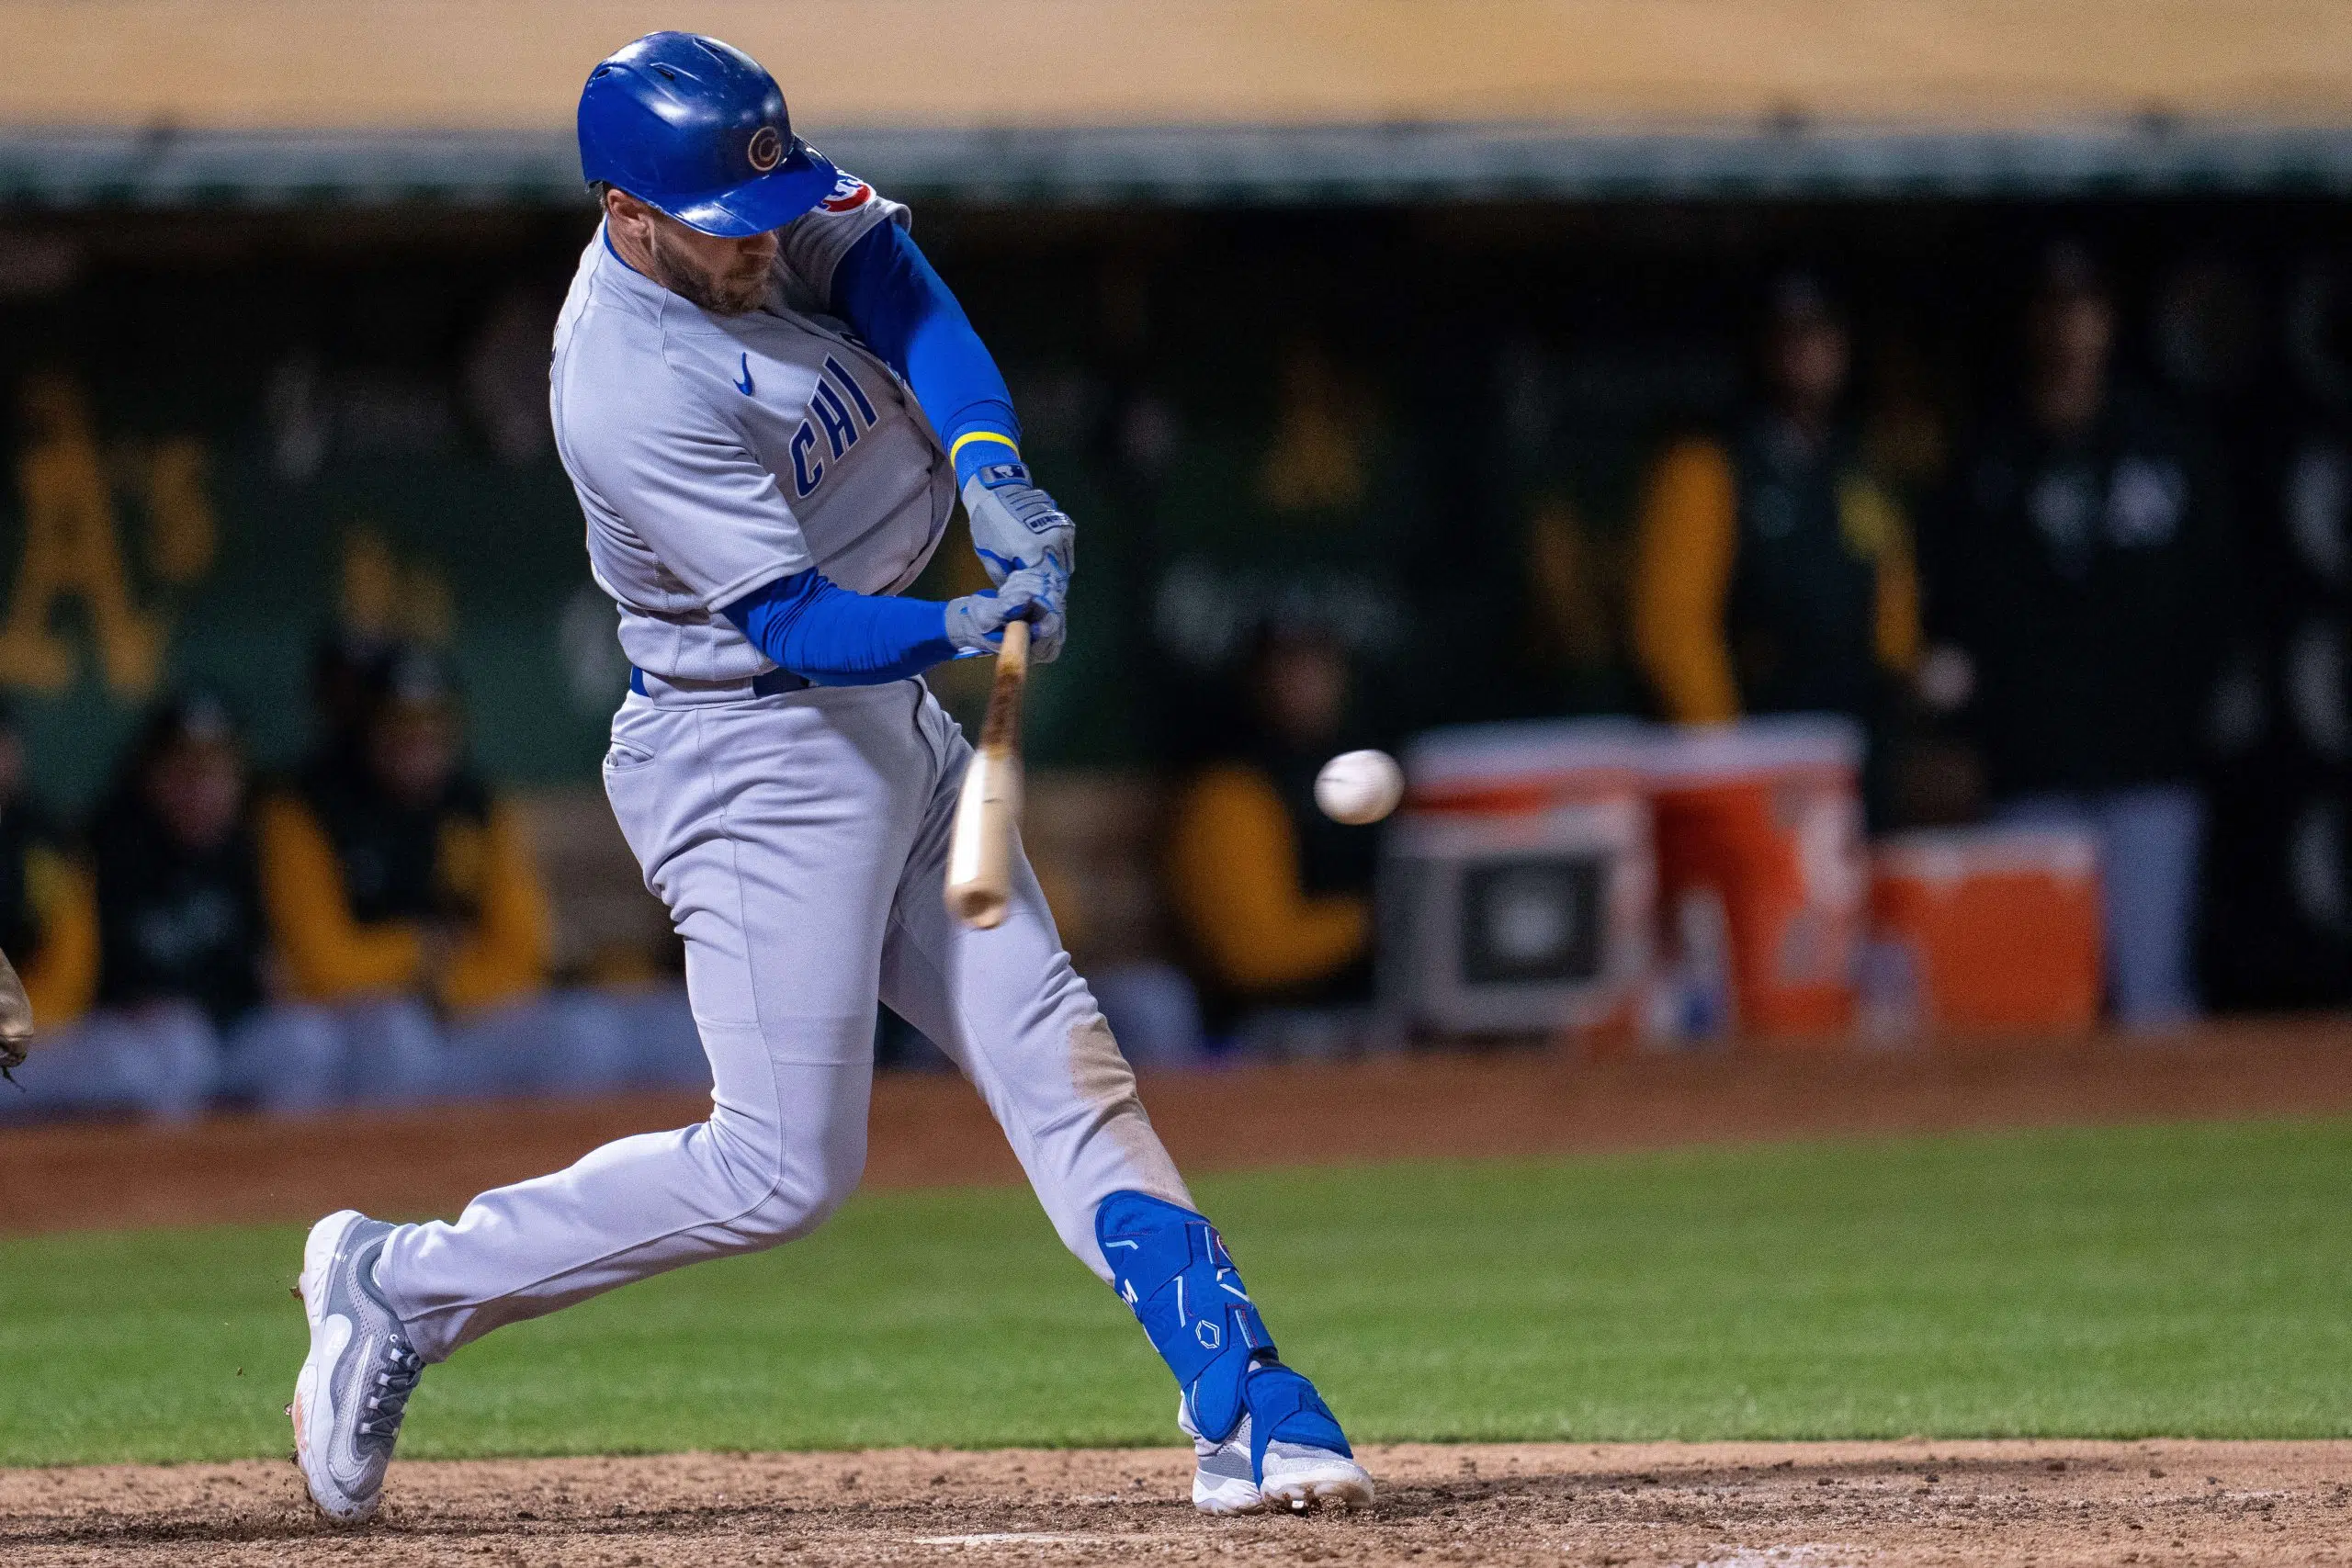 Patrick Wisdom Blasts 2 Homers, Cubs Roll 10-1 Over A's